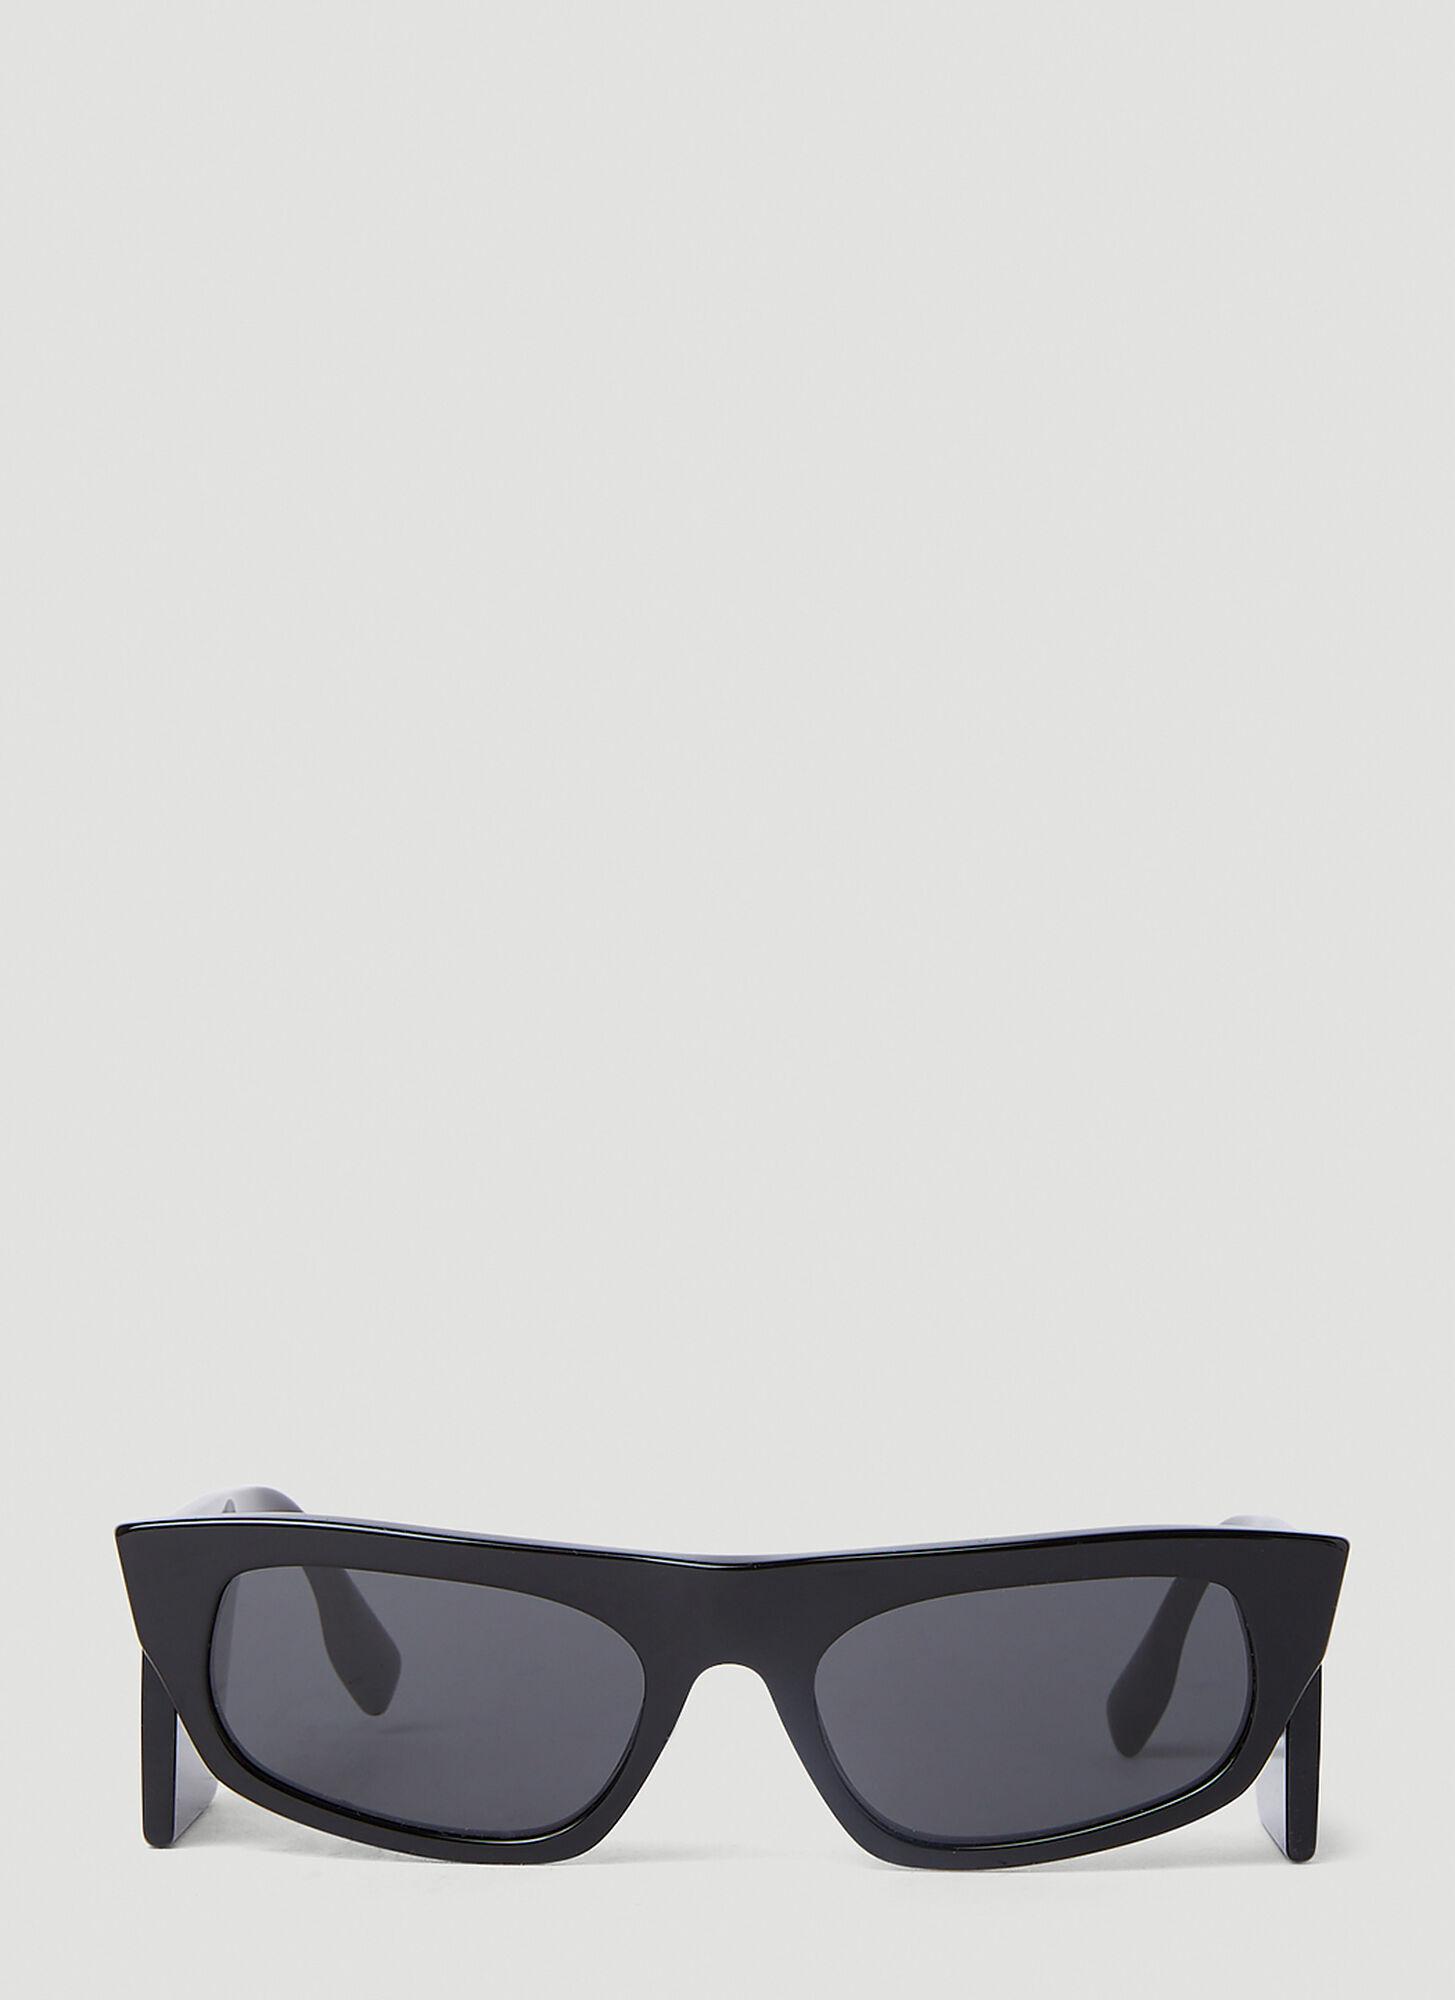 Burberry Palmer Sunglasses in Gray | Lyst